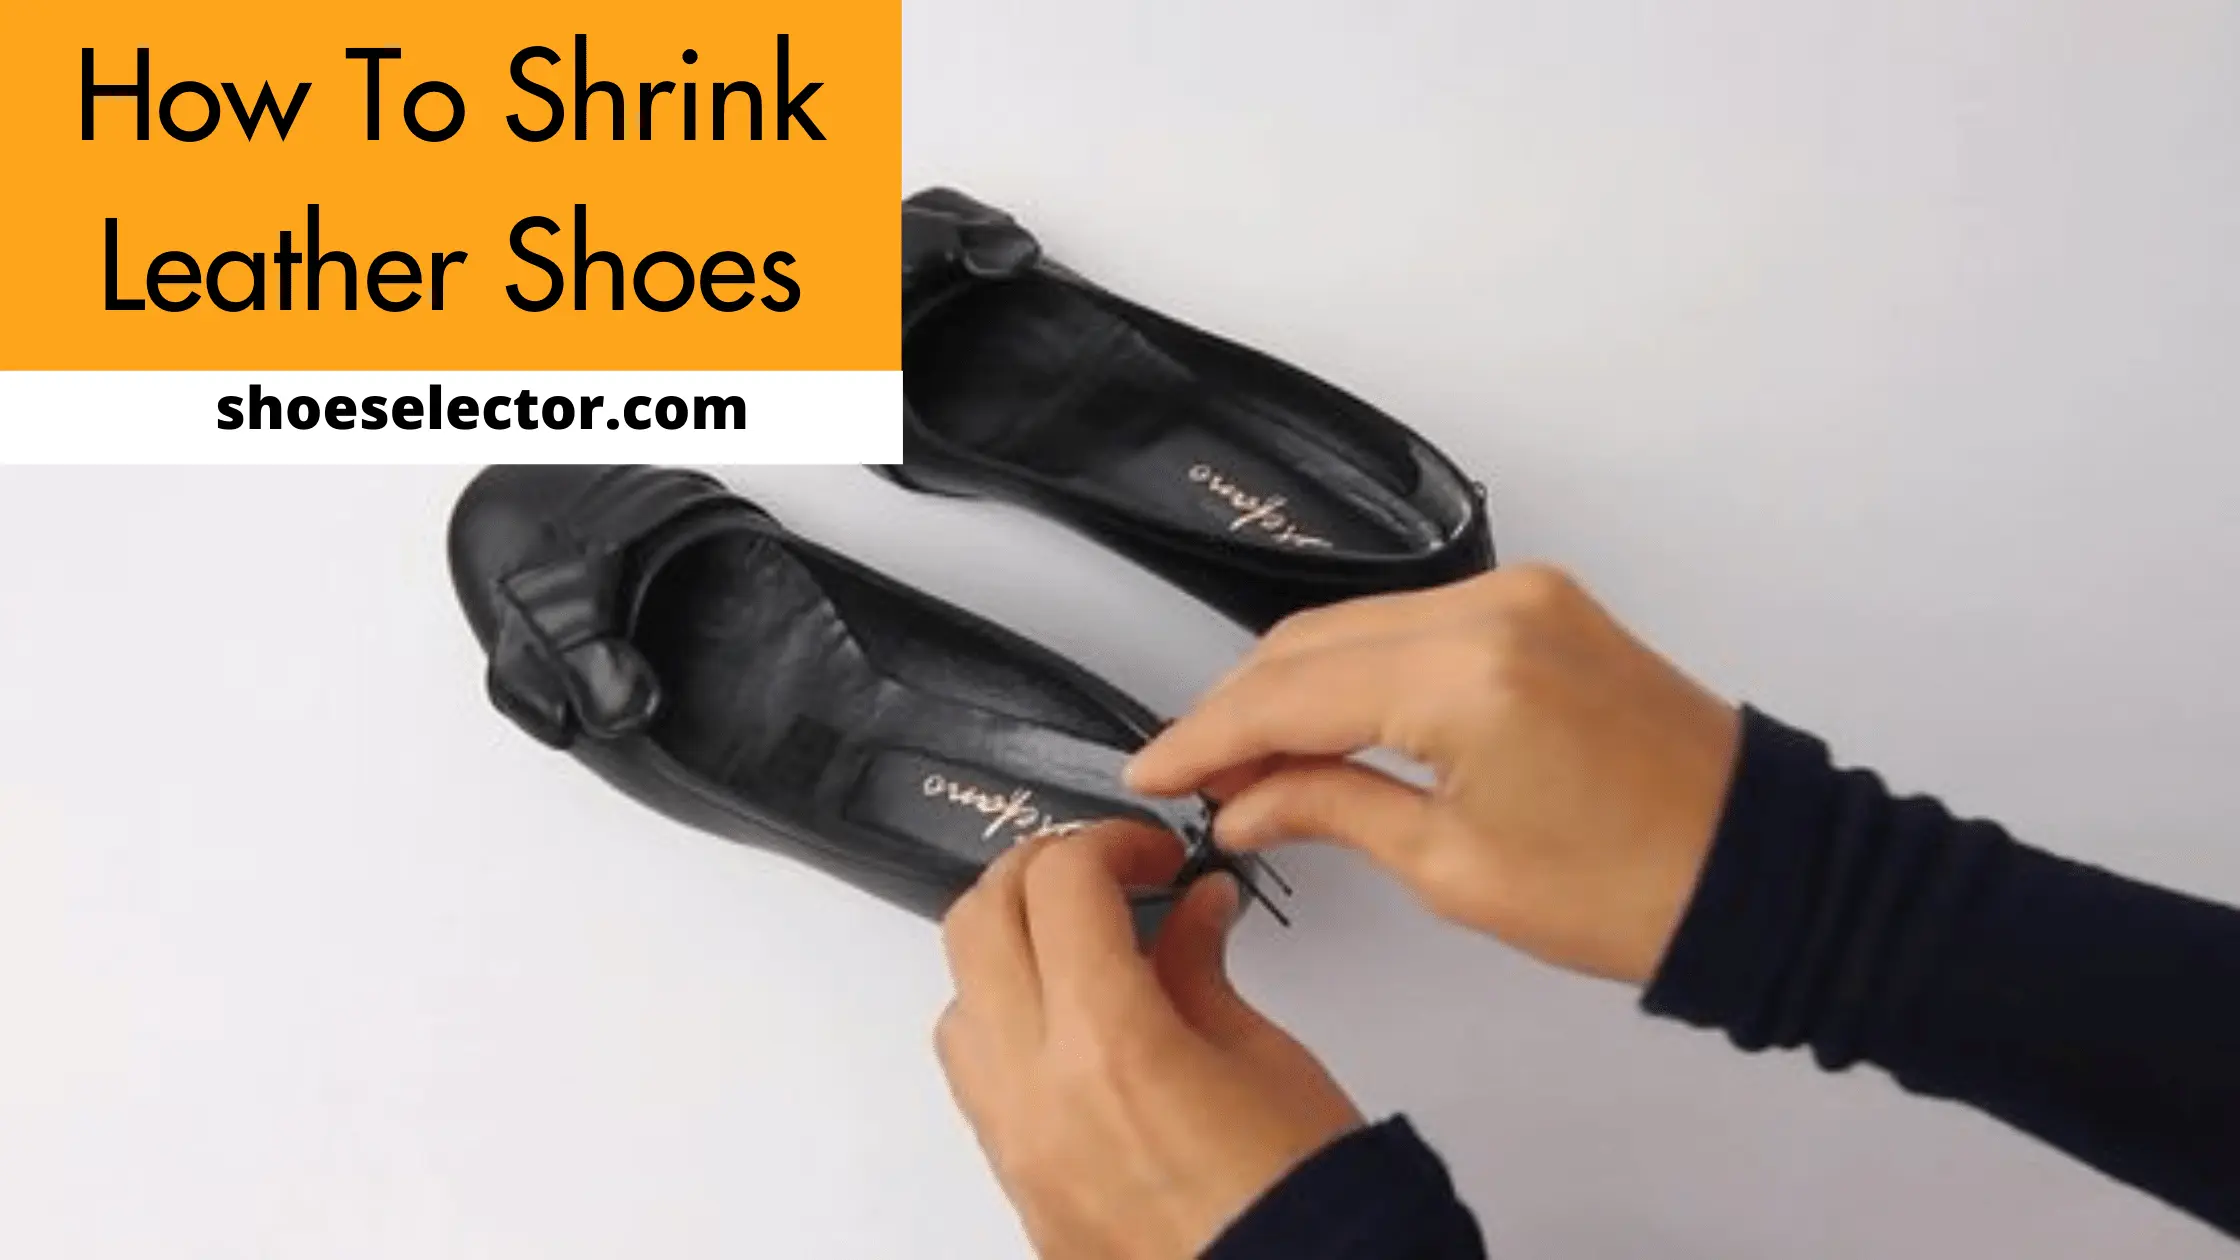 How To Shrink Leather Shoes? - #1 Solution